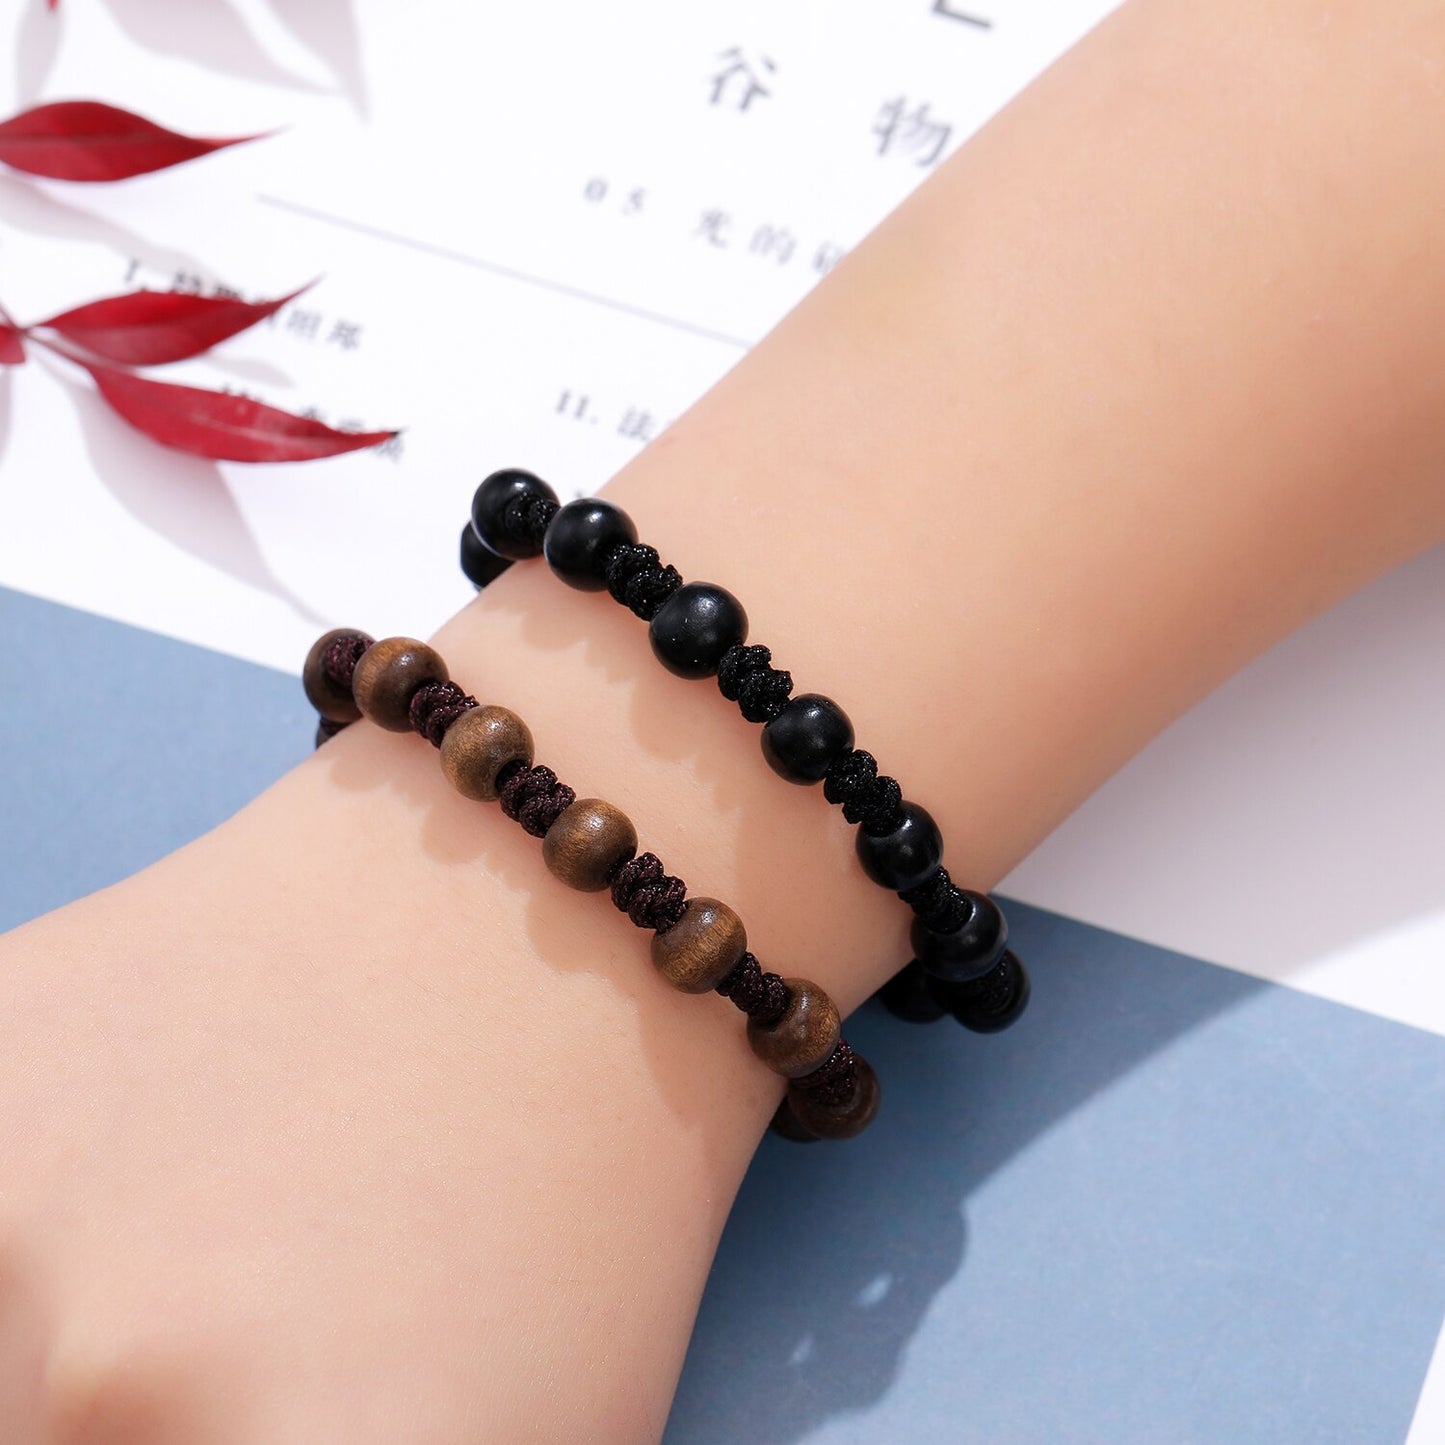 New 12pc/lot Tiger Eye Natural Stone Charms Braided Bracelet Set for Women Men Adjustable Black Rope Chain Wristband Jewelry